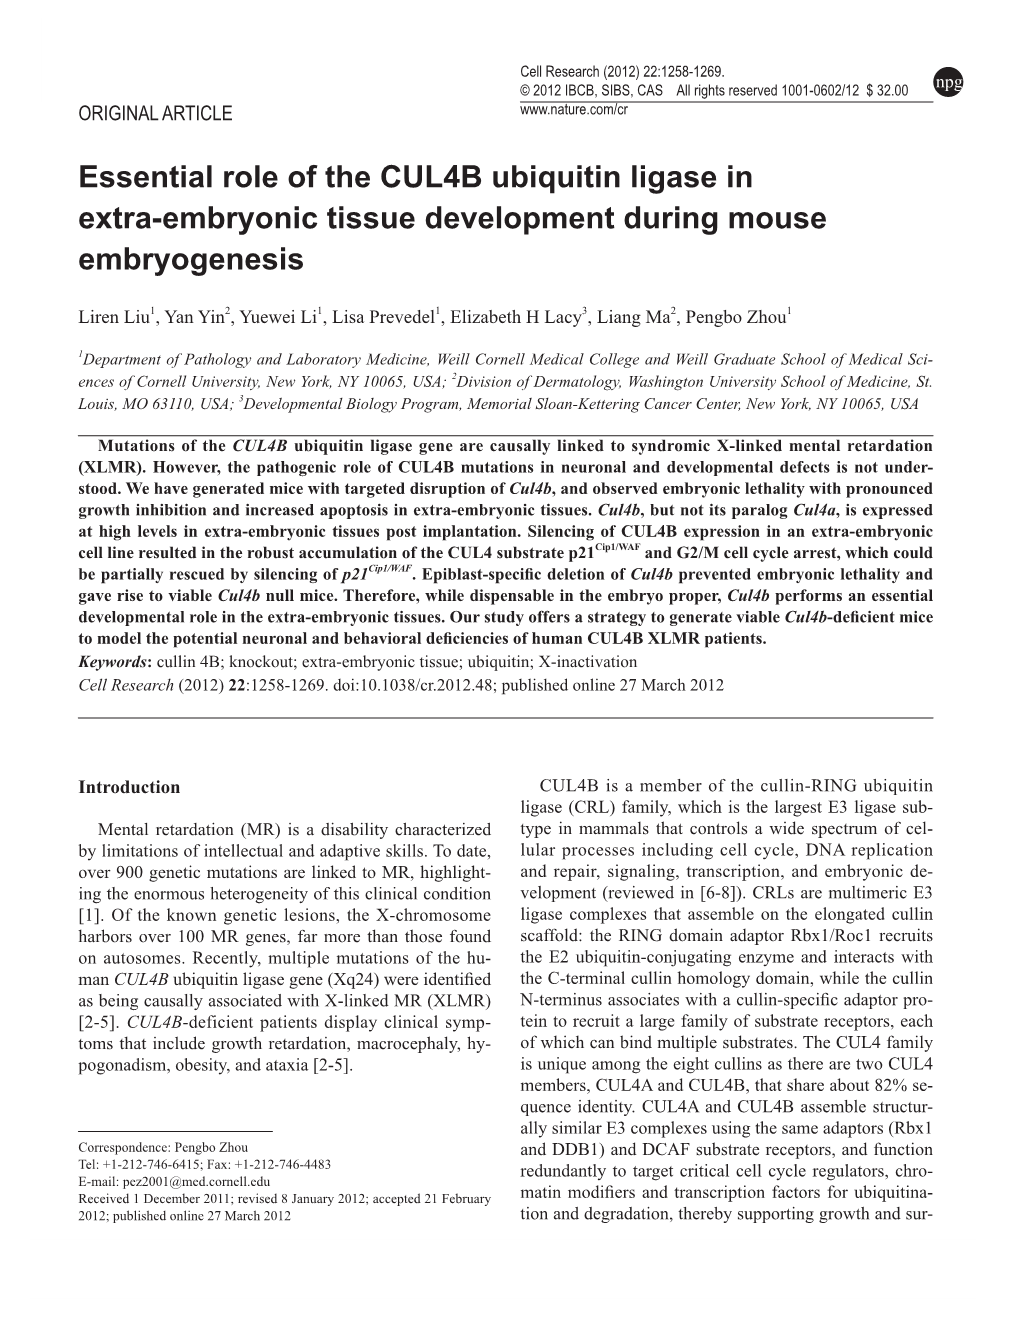 Essential Role of the CUL4B Ubiquitin Ligase in Extra-Embryonic Tissue Development During Mouse Embryogenesis